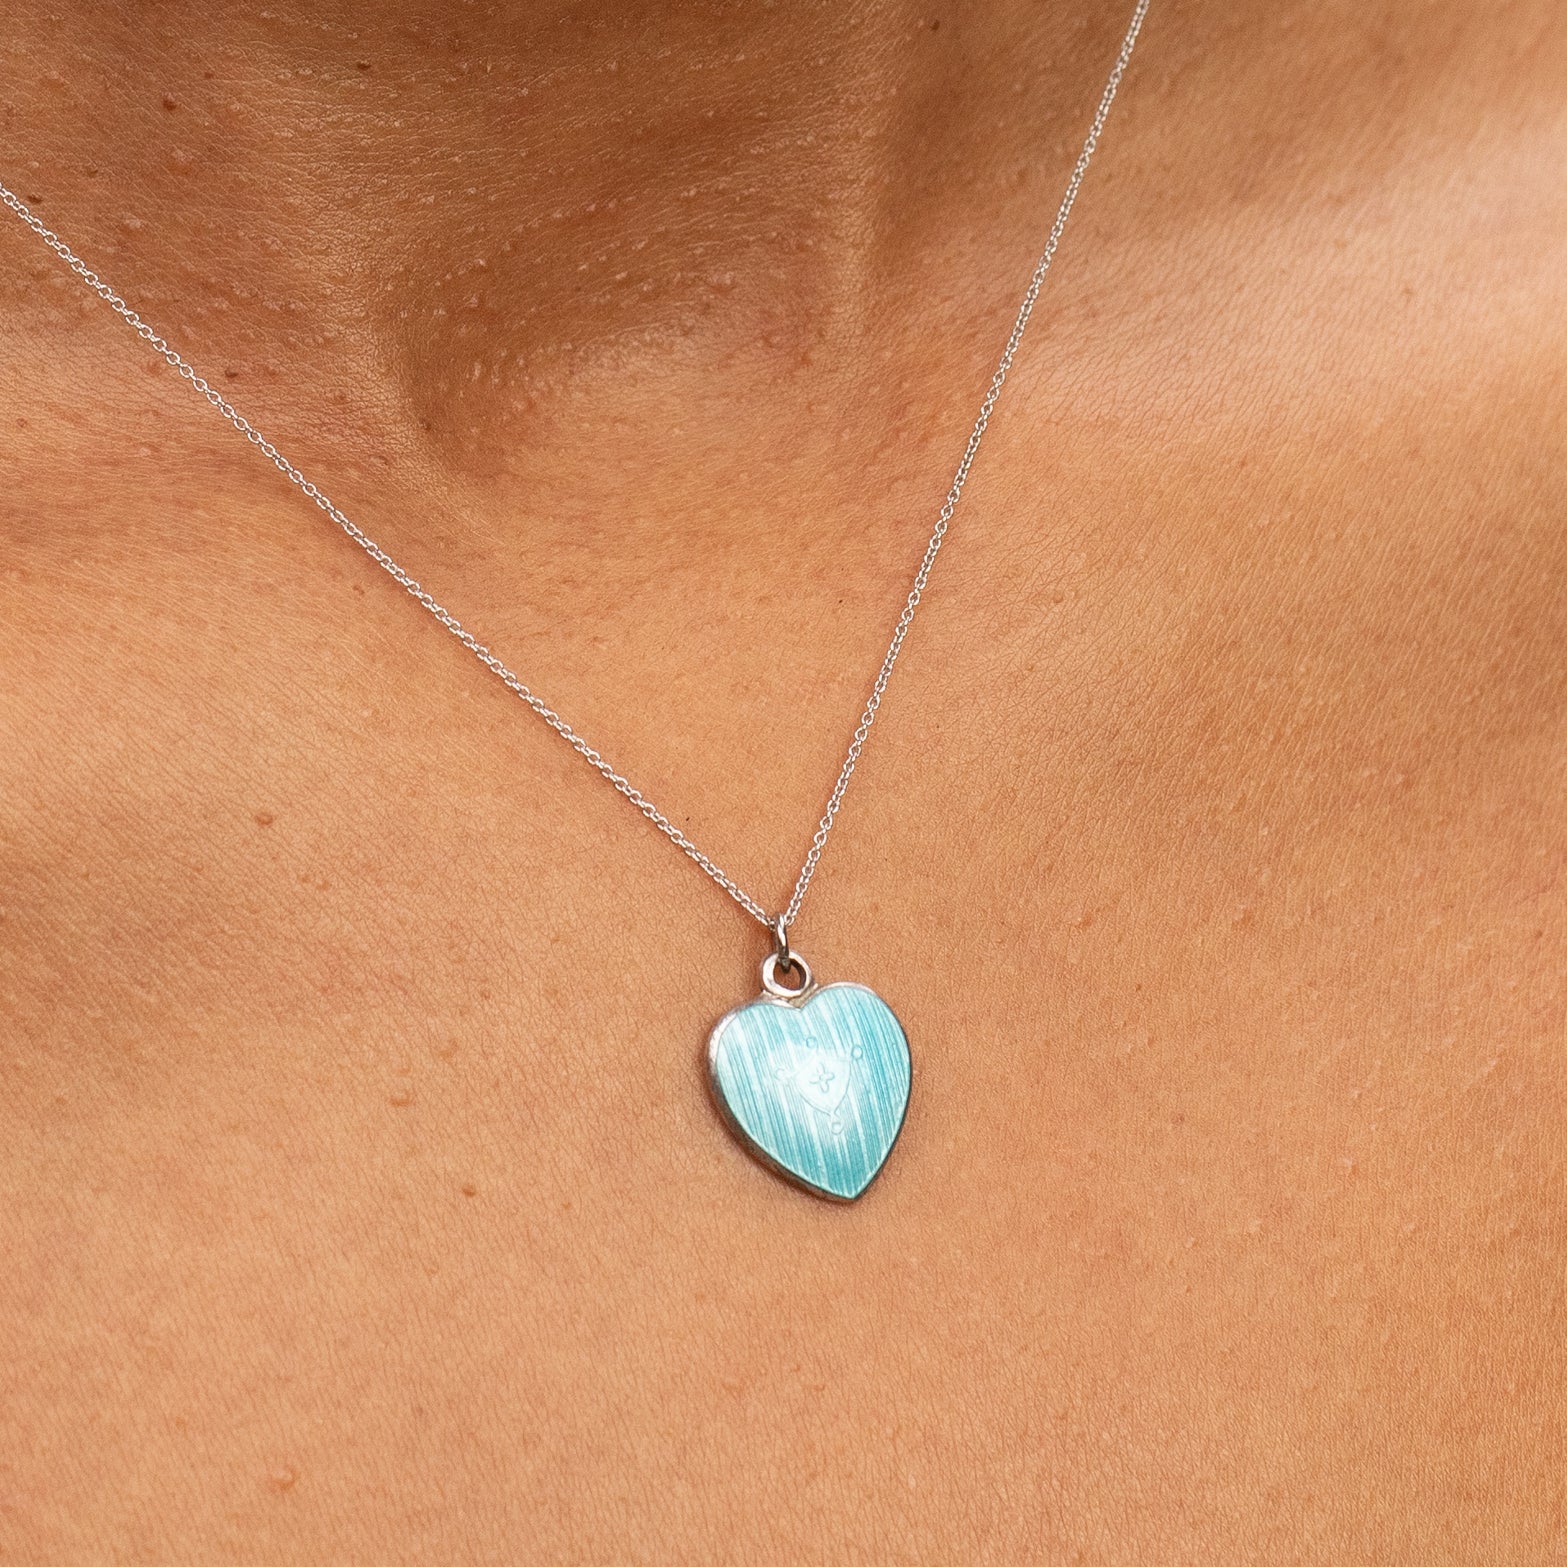 Blue Guilloche Enamel and Silver Heart Charm